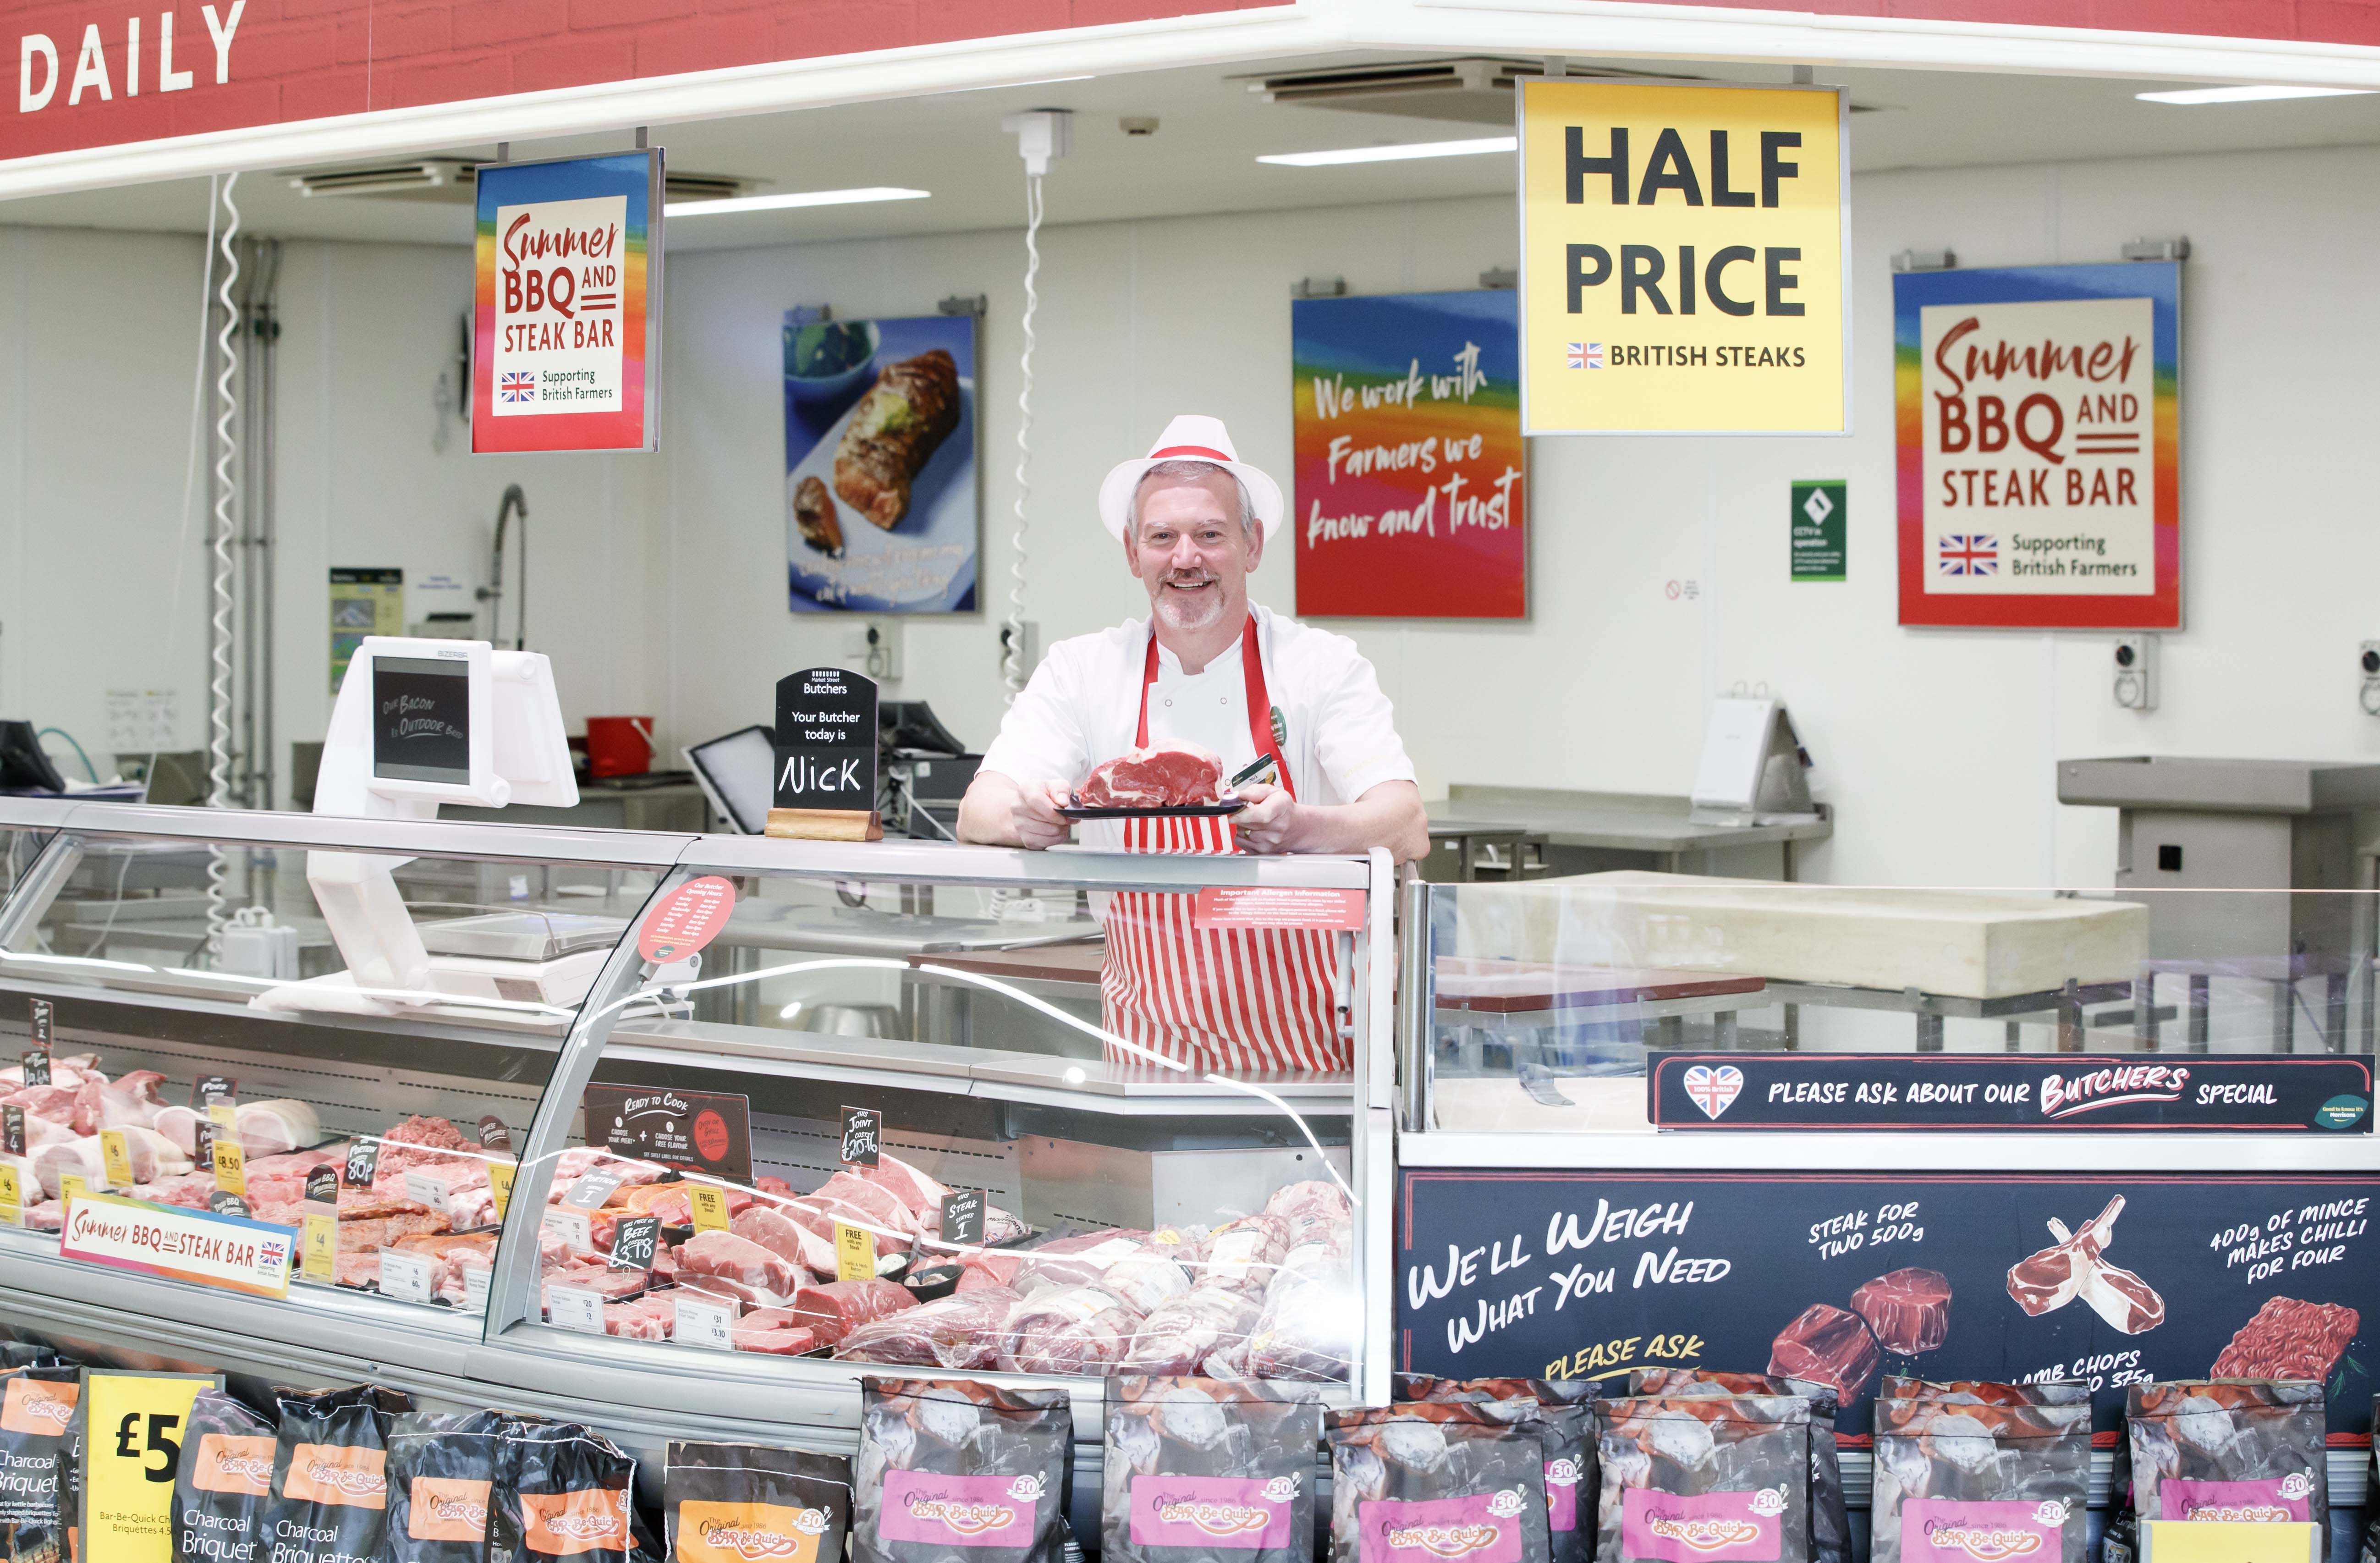 Morrisons sells 'Restaurant Quality' seafood and steaks for half price